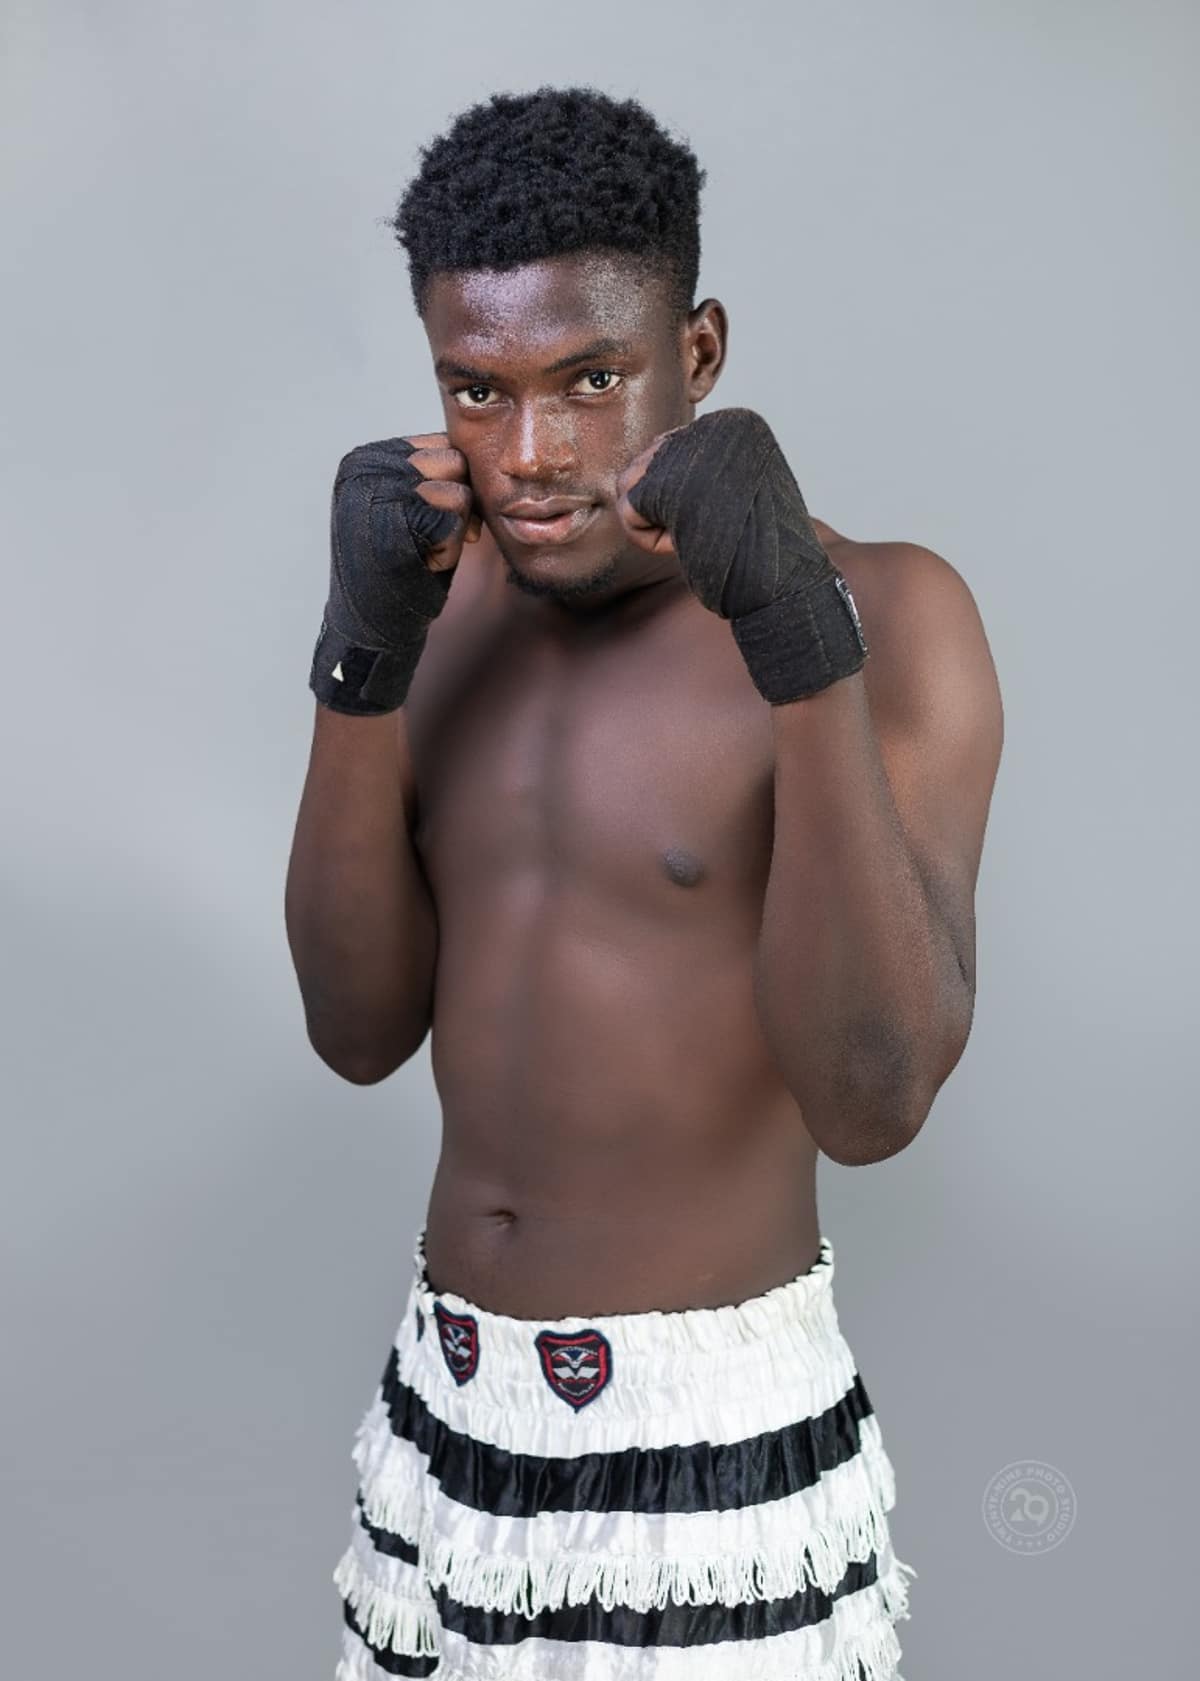 Young  Ghanaian Jon Power Dreams Big After 8th Straight KO Win To Start Career – Boxing Results